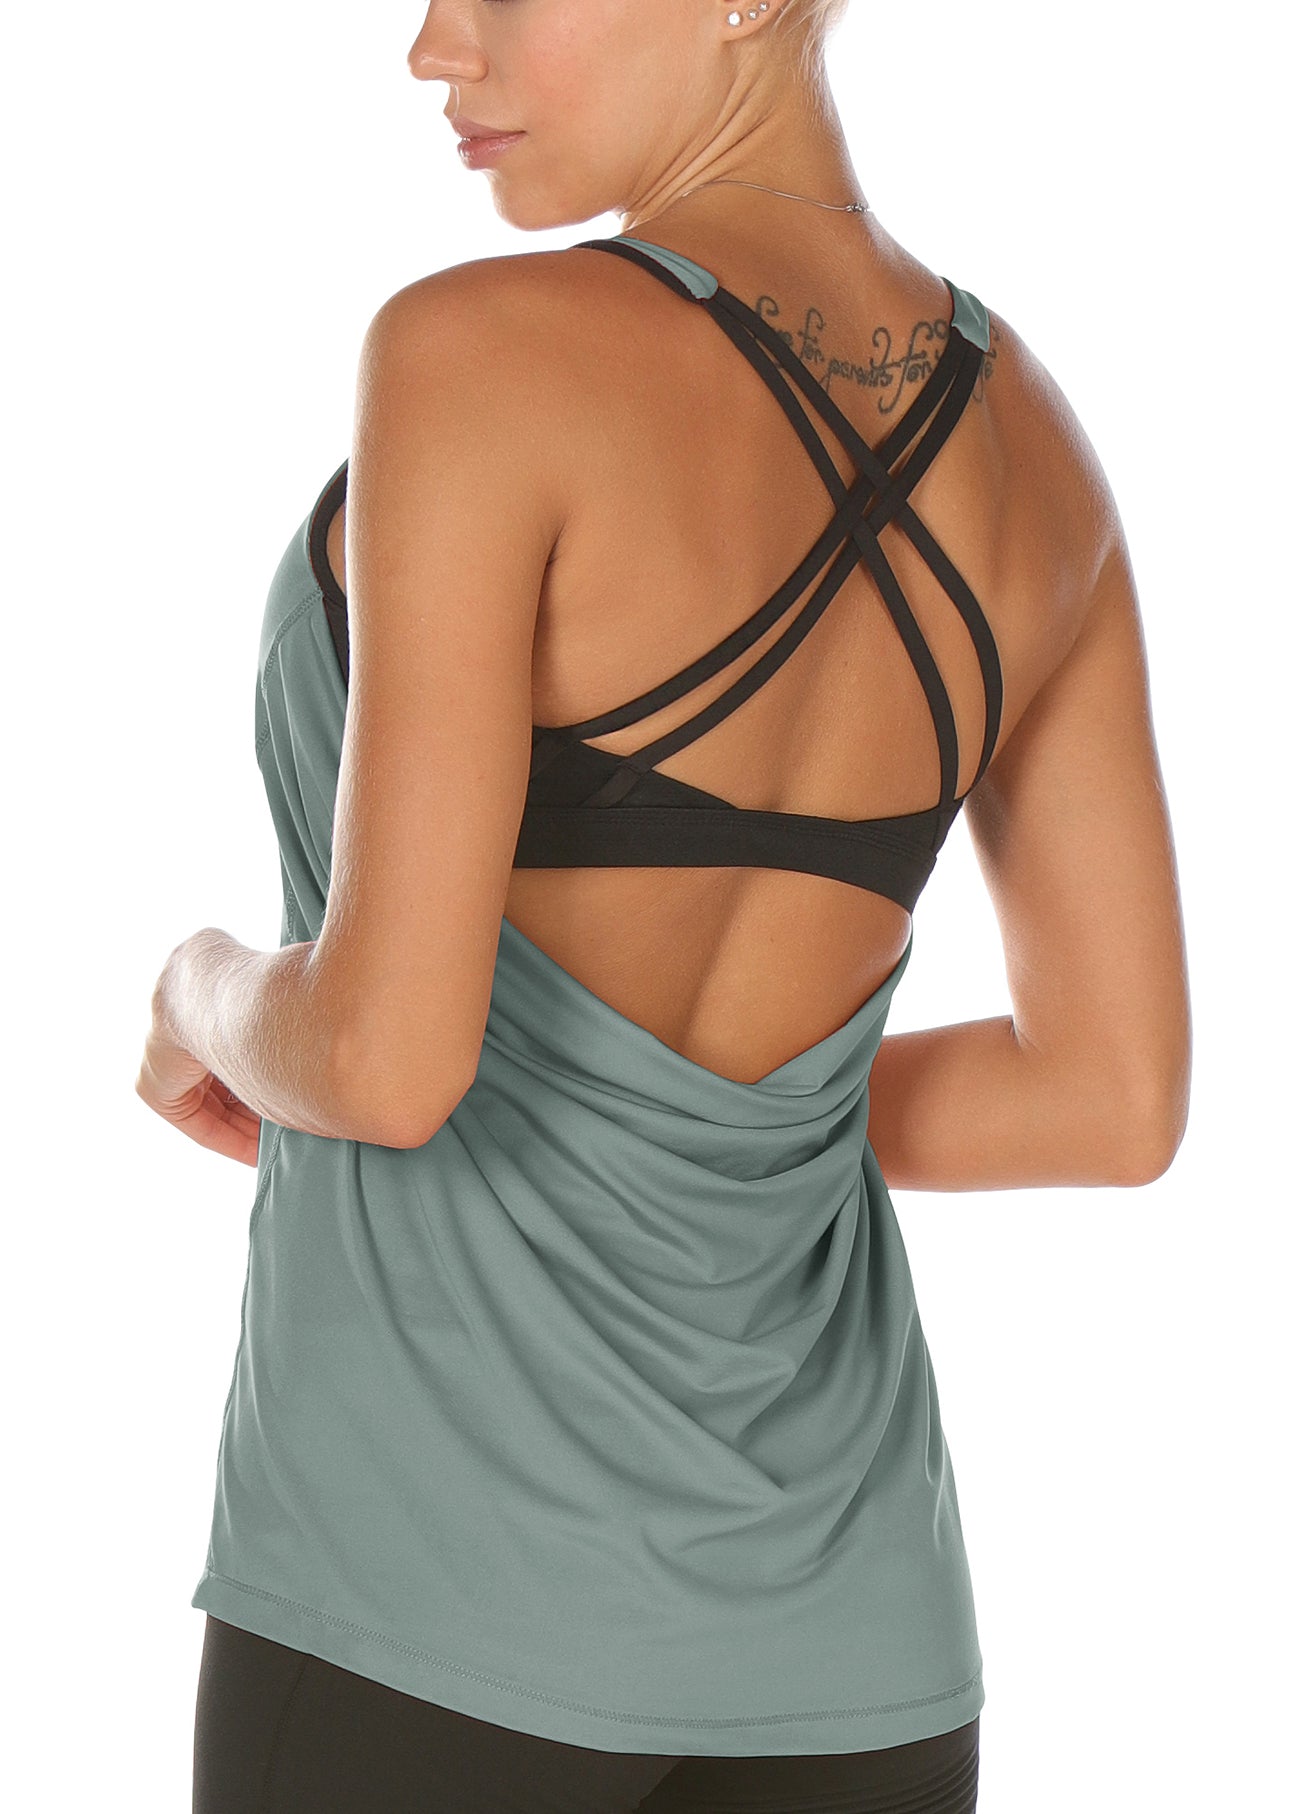 Yoga Tank Top Built in Bra - Women's Strappy Sports Vest Exercise Gym  Shirts Workout Tops at  Women's Clothing store